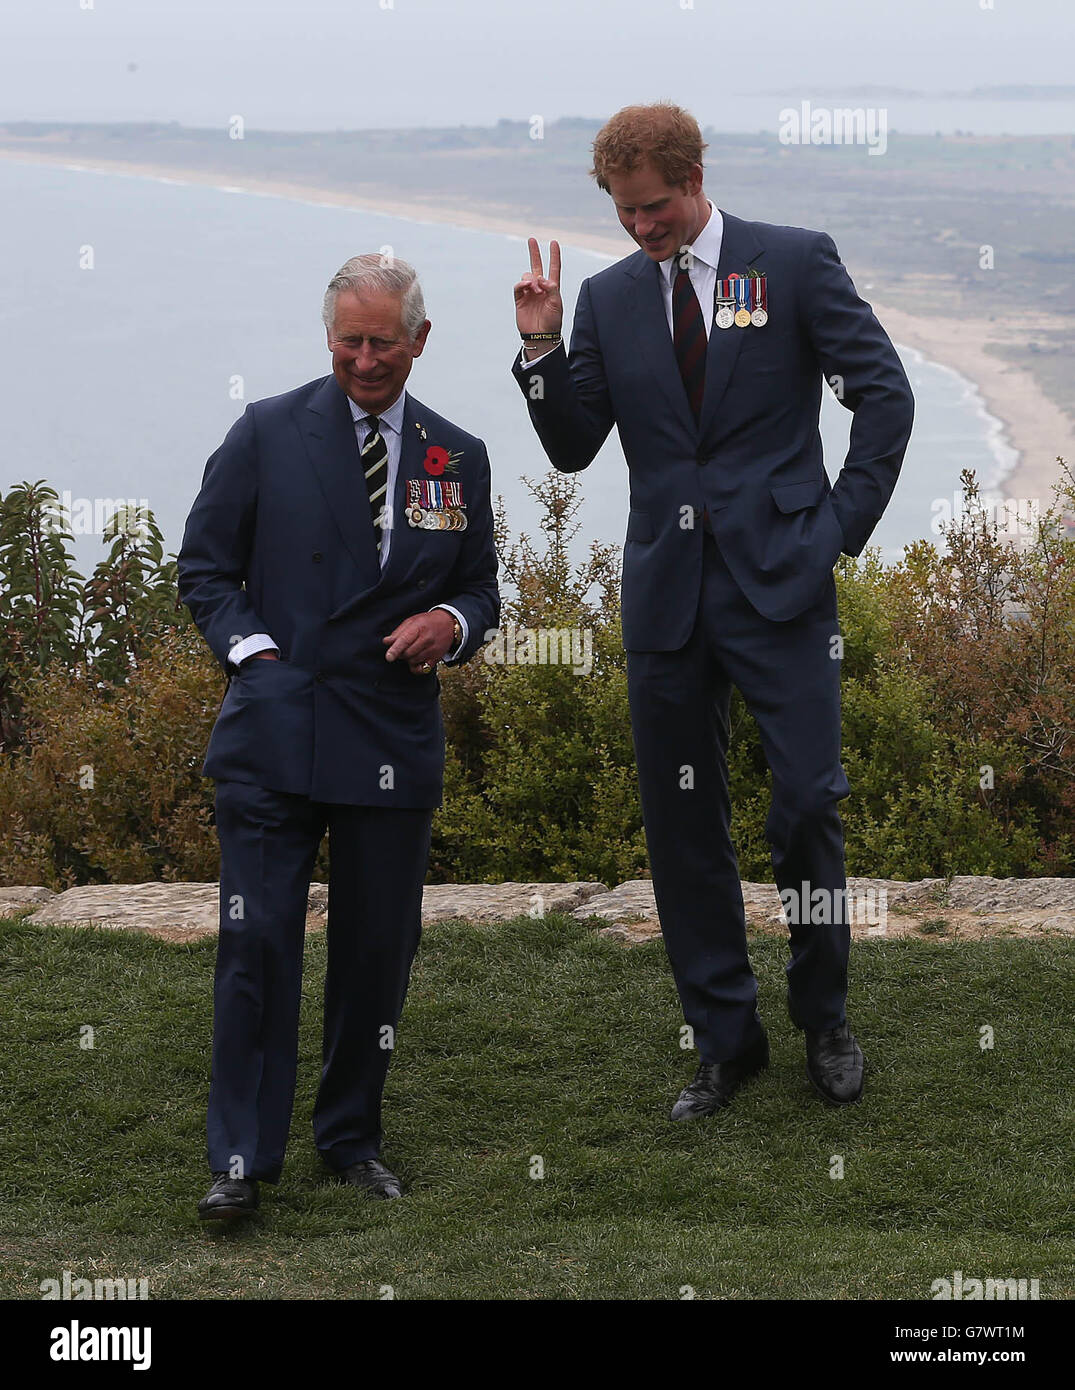 The Prince of Wales and Prince Harry visit The Nek, a narrow stretch of ridge in the Anzac battlefield on the Gallipoli Peninsula, as part of commemorations marking the 100th anniversary of the doomed Gallipoli campaign. Stock Photo